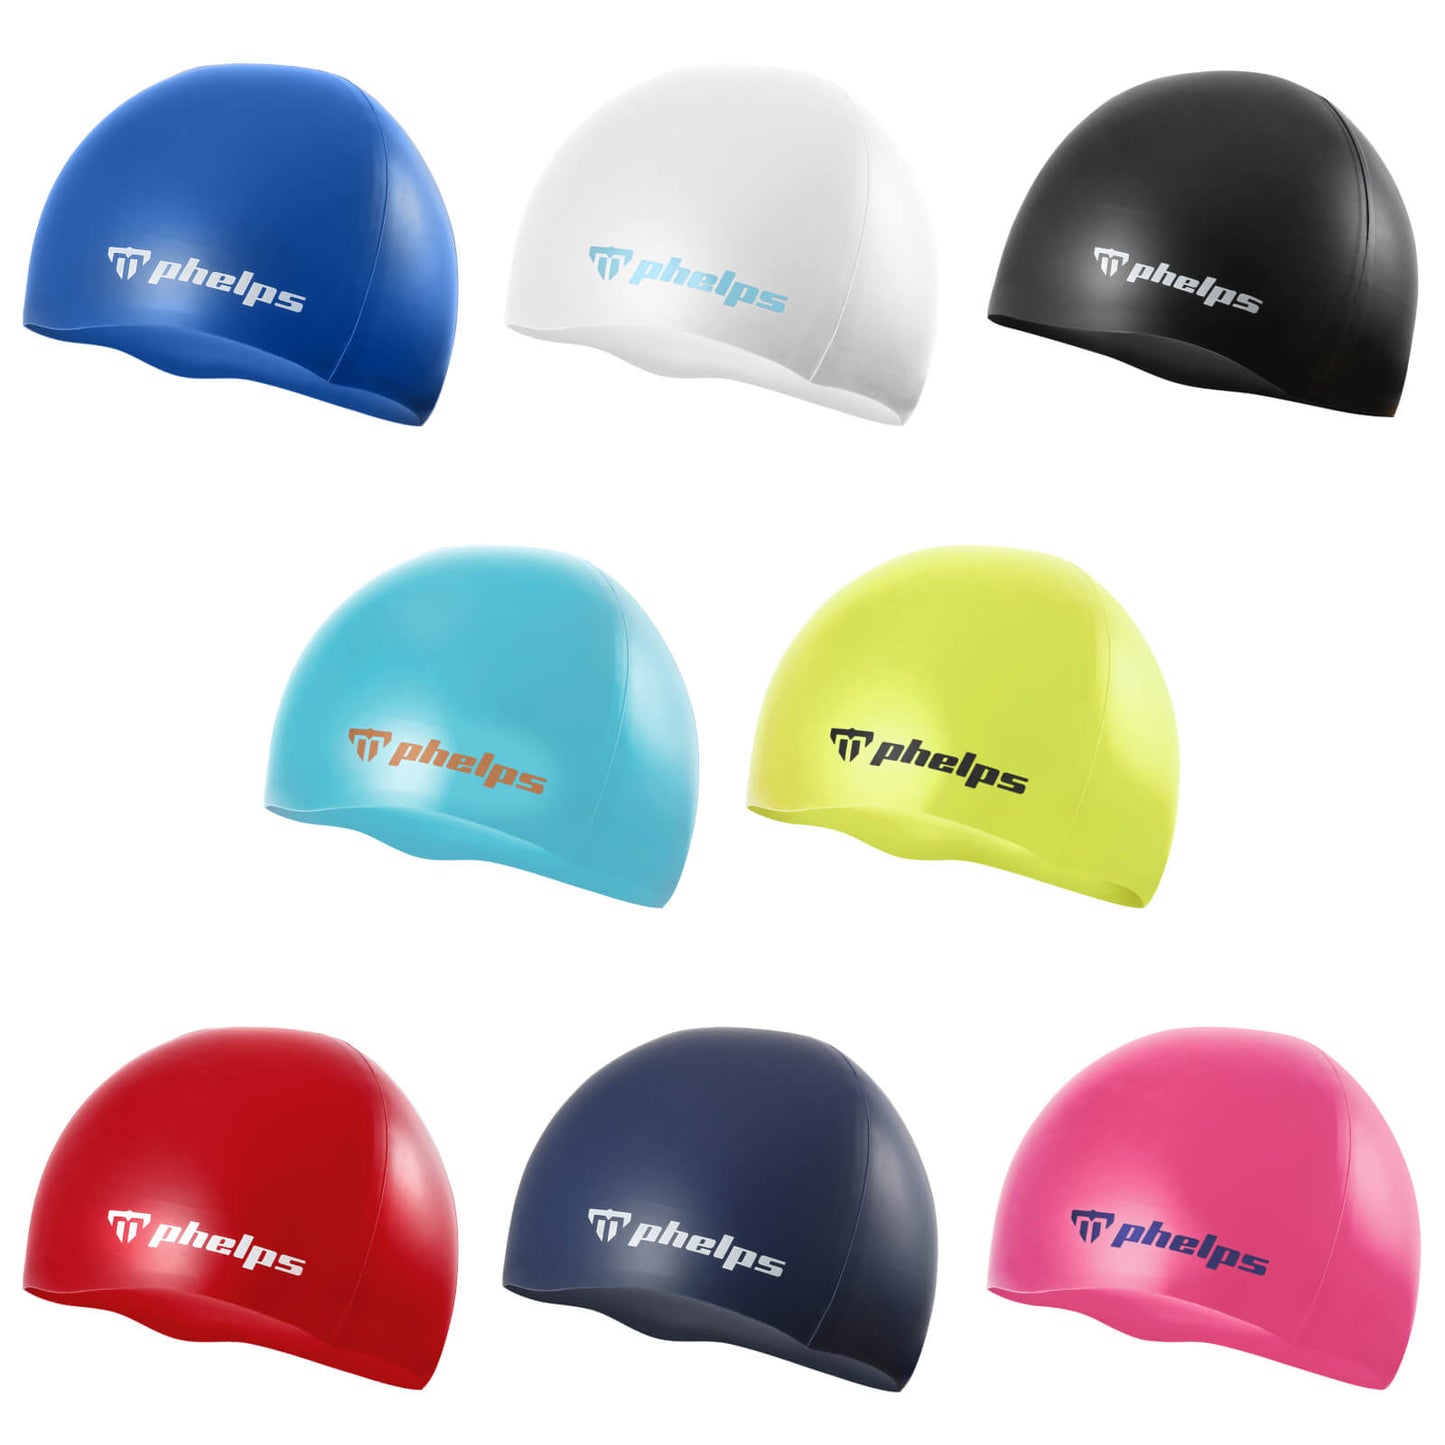 Phelps Classic Silicone Men's Swimming Cap Collection